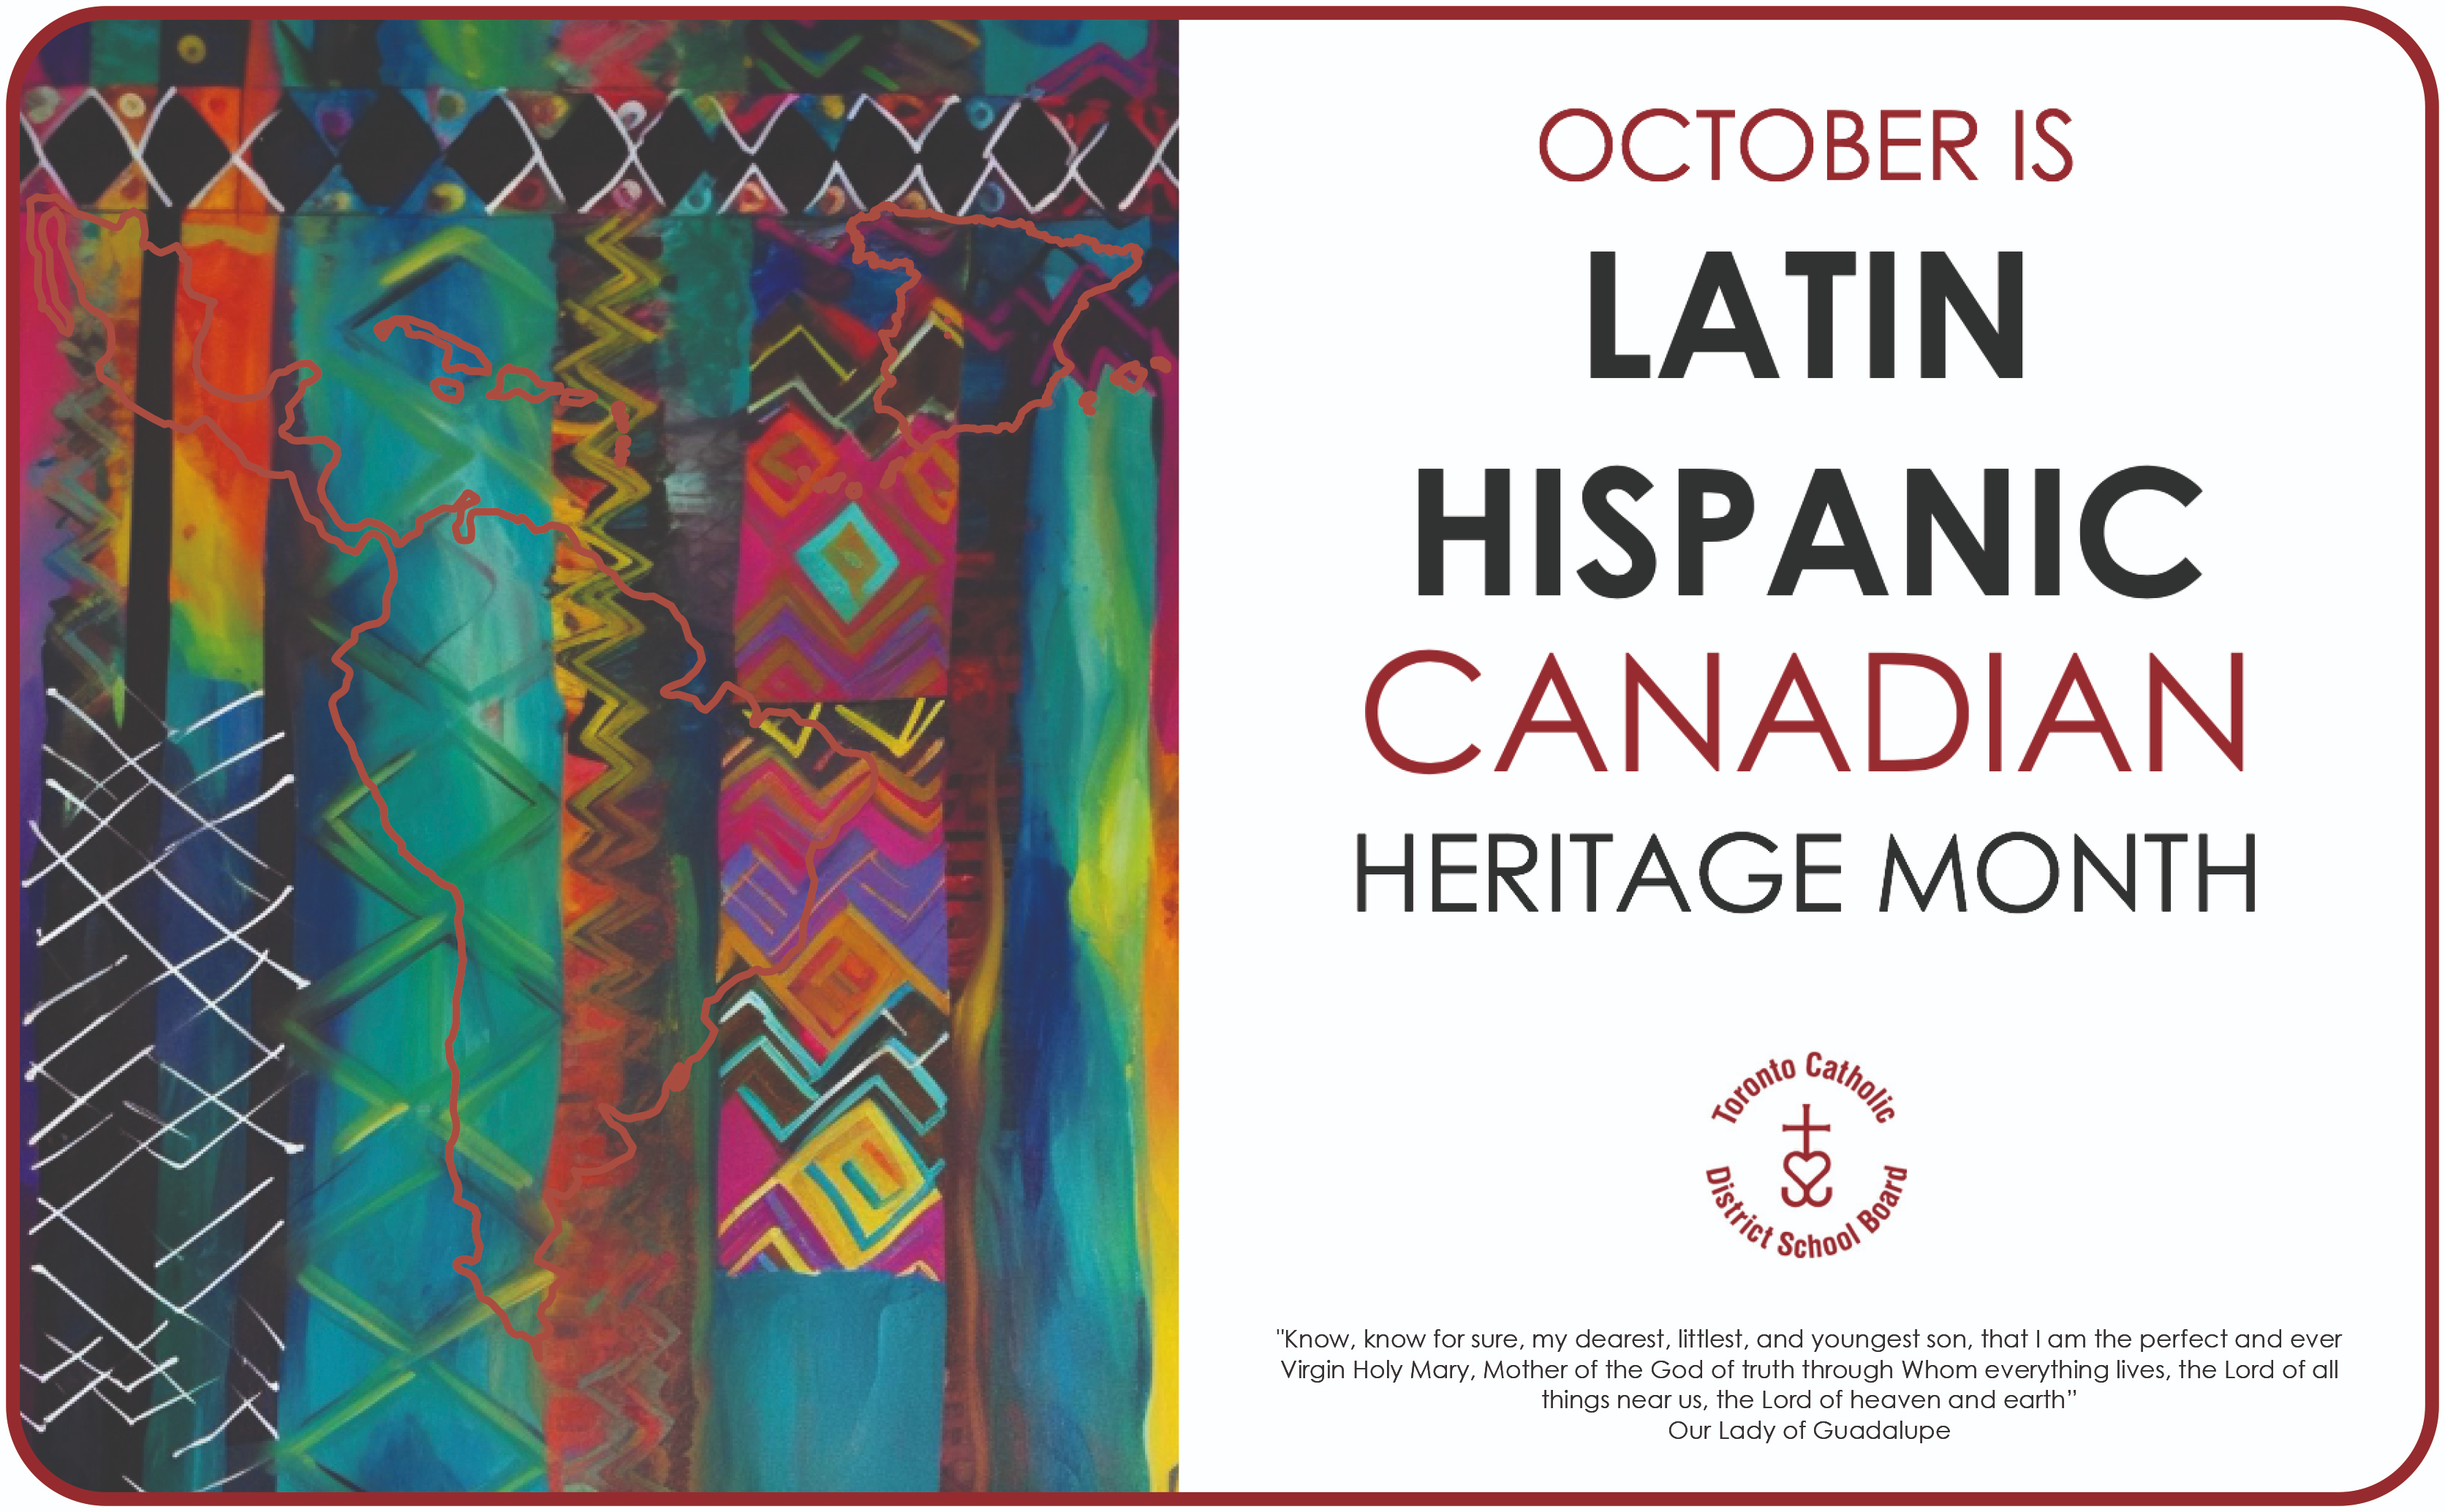 October is Latin Hispanic Canadian Heritage Month - "Know, know for sure, my dearest, littlest, and youngest son, that I am the perfect and ever Virgin Holy Mary, Mother of the God of truth through Whom everything lives, the Lord of all things near us, the Lord of heaven and earth." - Our Lady of Guadalupe